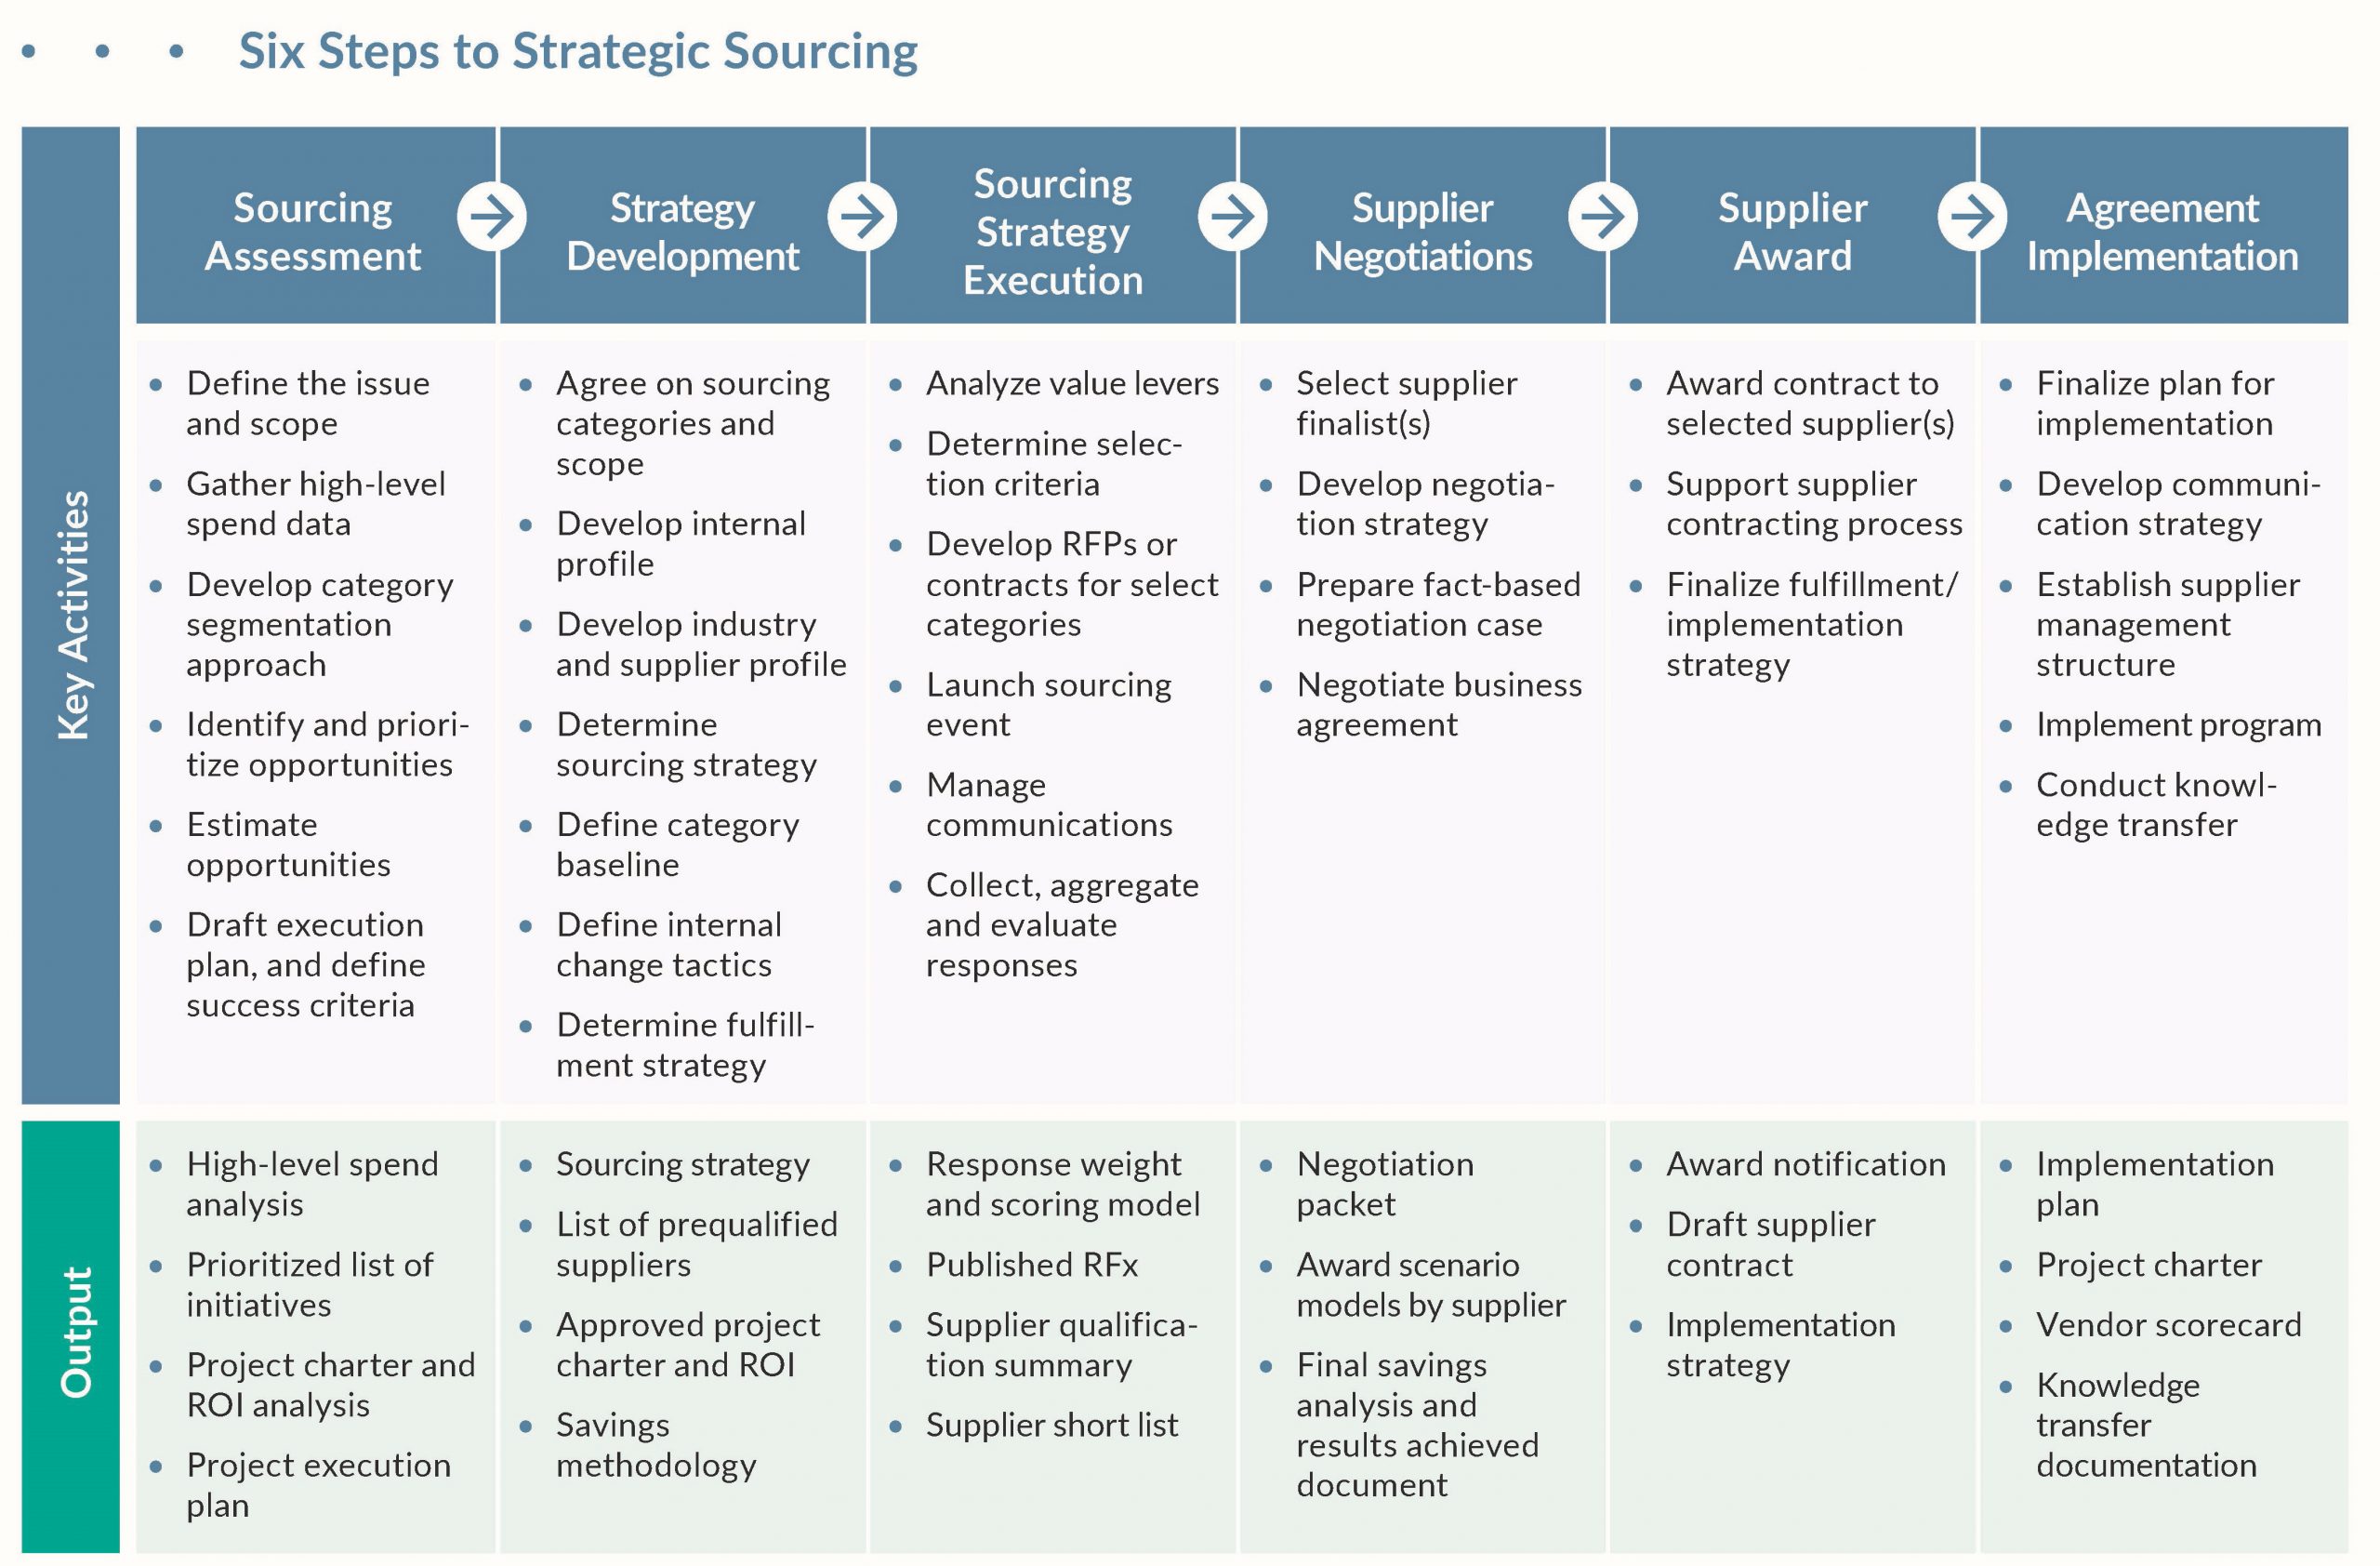 Graphic For Protiviti Byliner Six Steps To Strategic Sourcing Final 5 11 20 Scaled, Industry Today